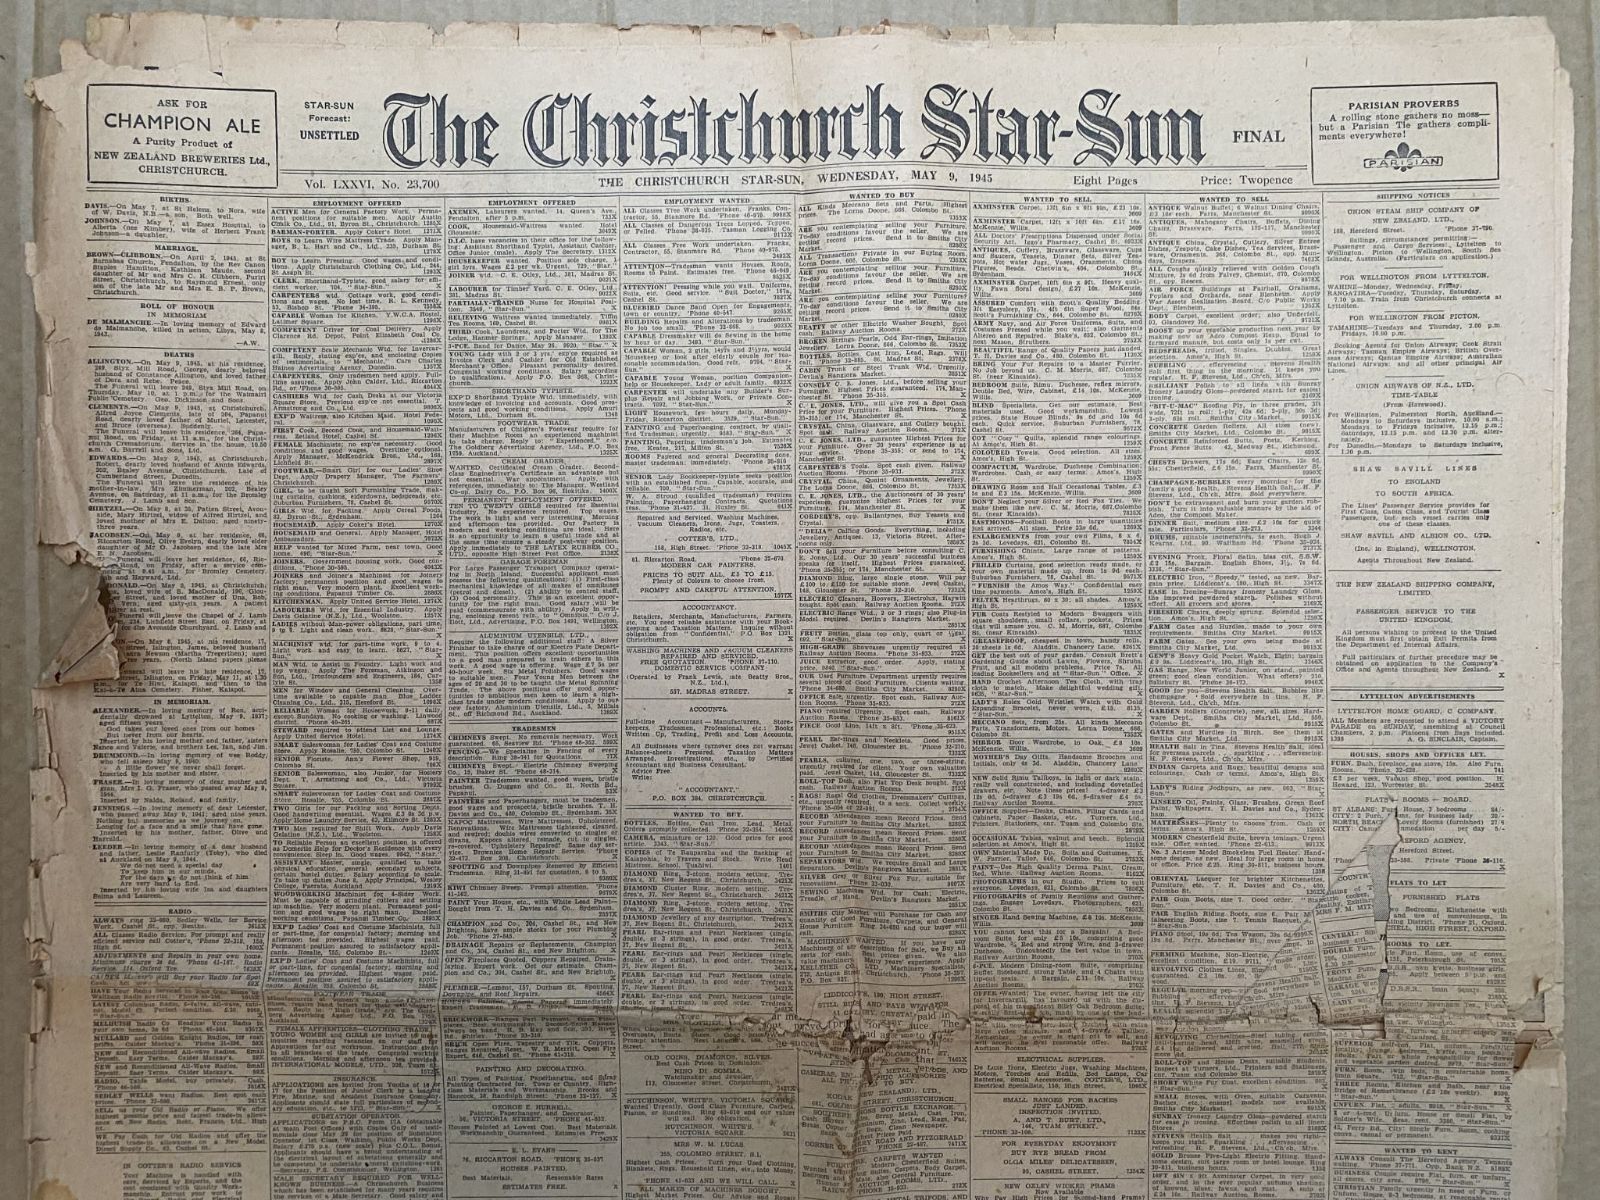 OLD NEWSPAPER: The Christchurch Star-Sun, 9 May 1945